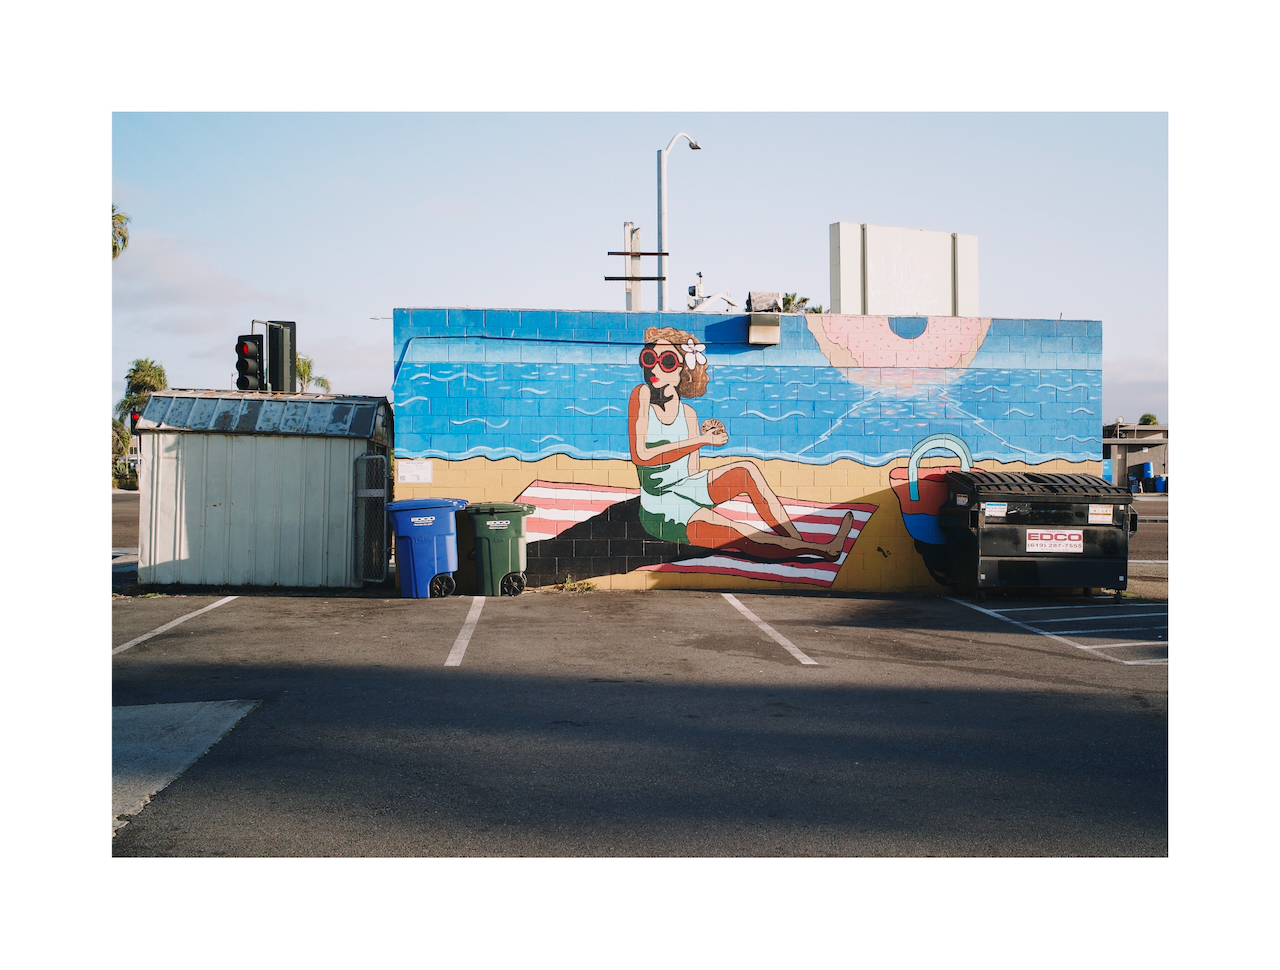 A mural shows a woman on the beach eating a donut.